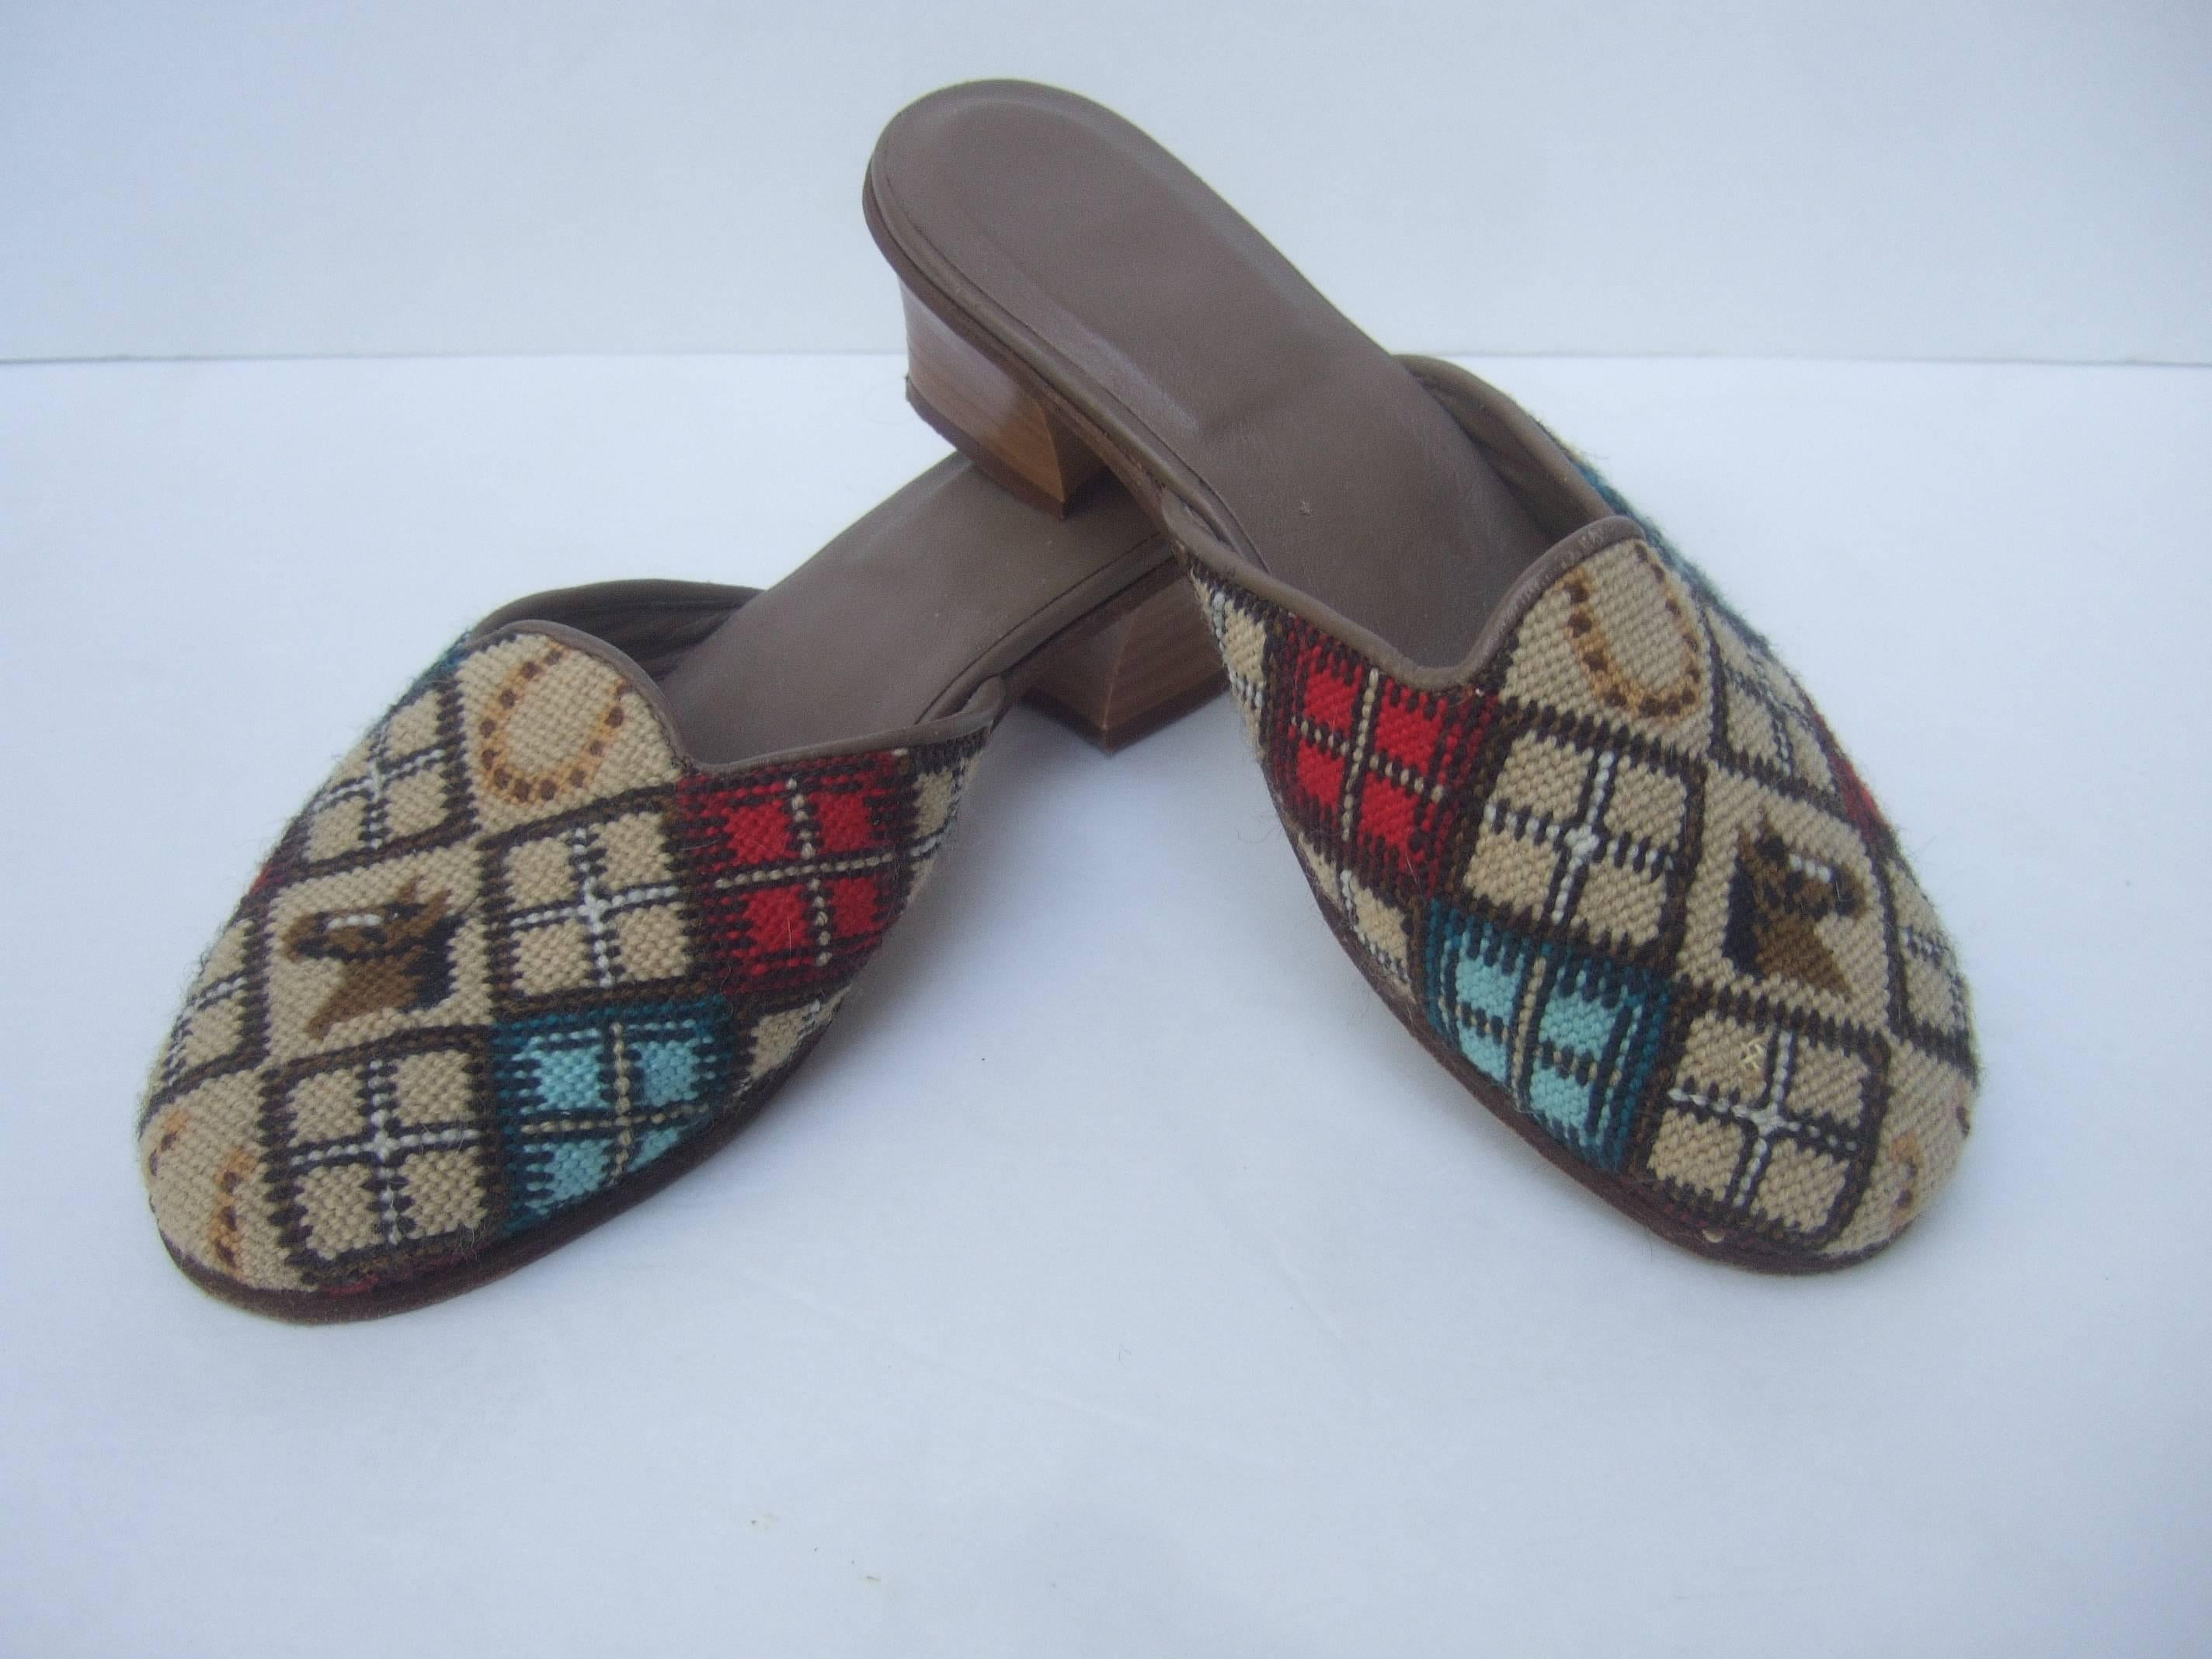 Charming Needlepoint Equine Slipper Shoes Made in Italy c 1980 2